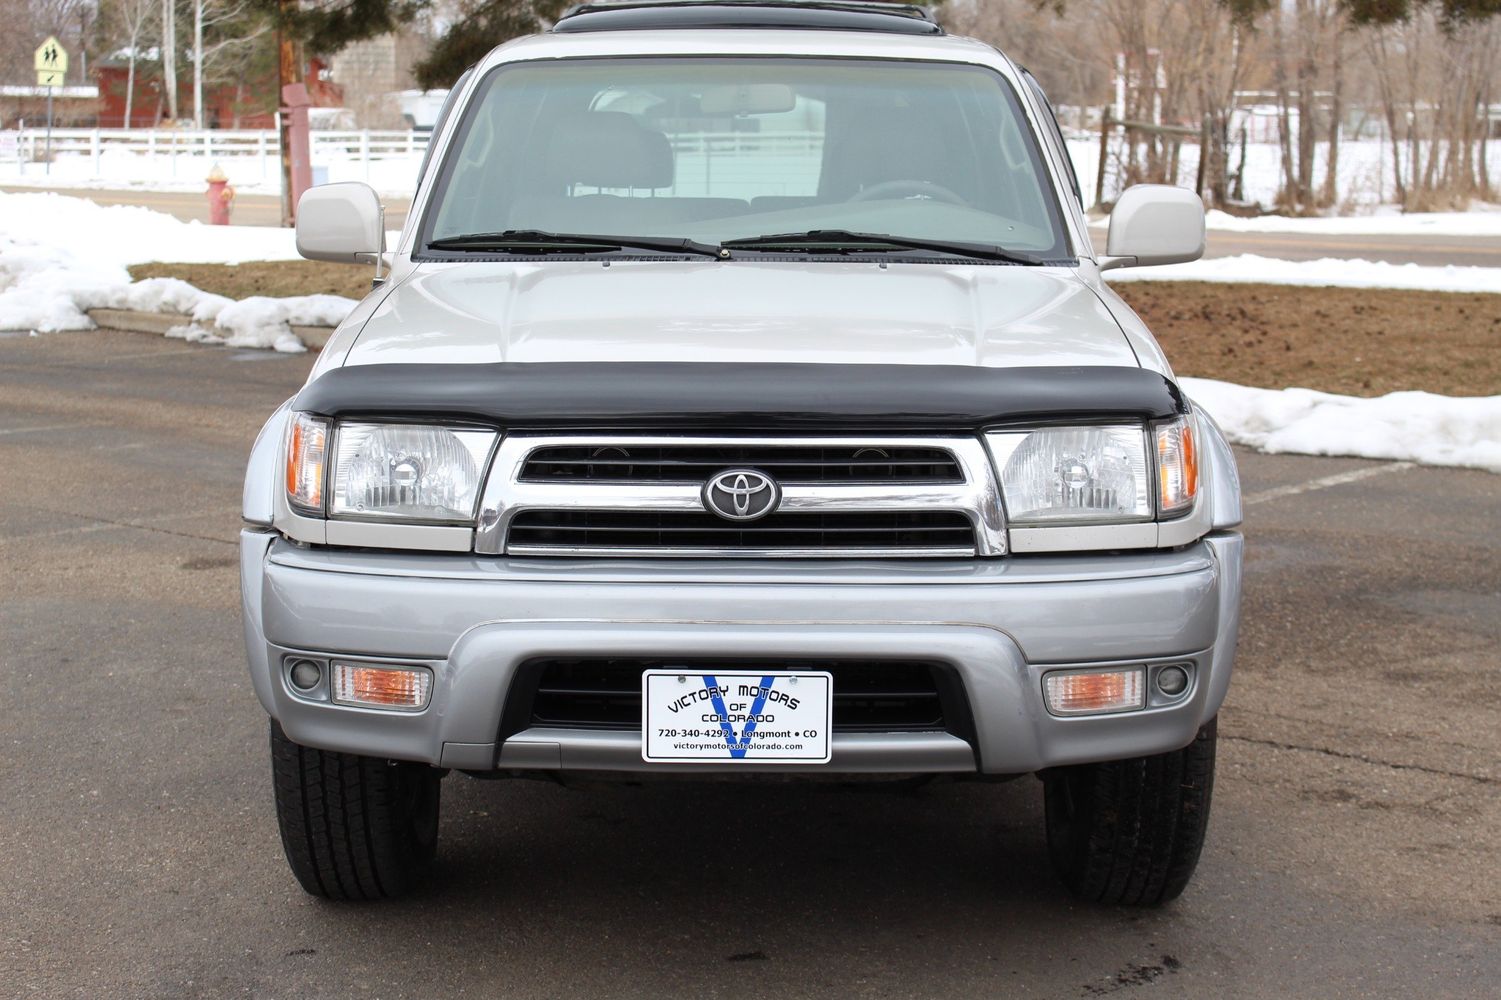 2000 Toyota 4Runner Limited | Victory Motors of Colorado 2000 Toyota 4runner V6 Towing Capacity